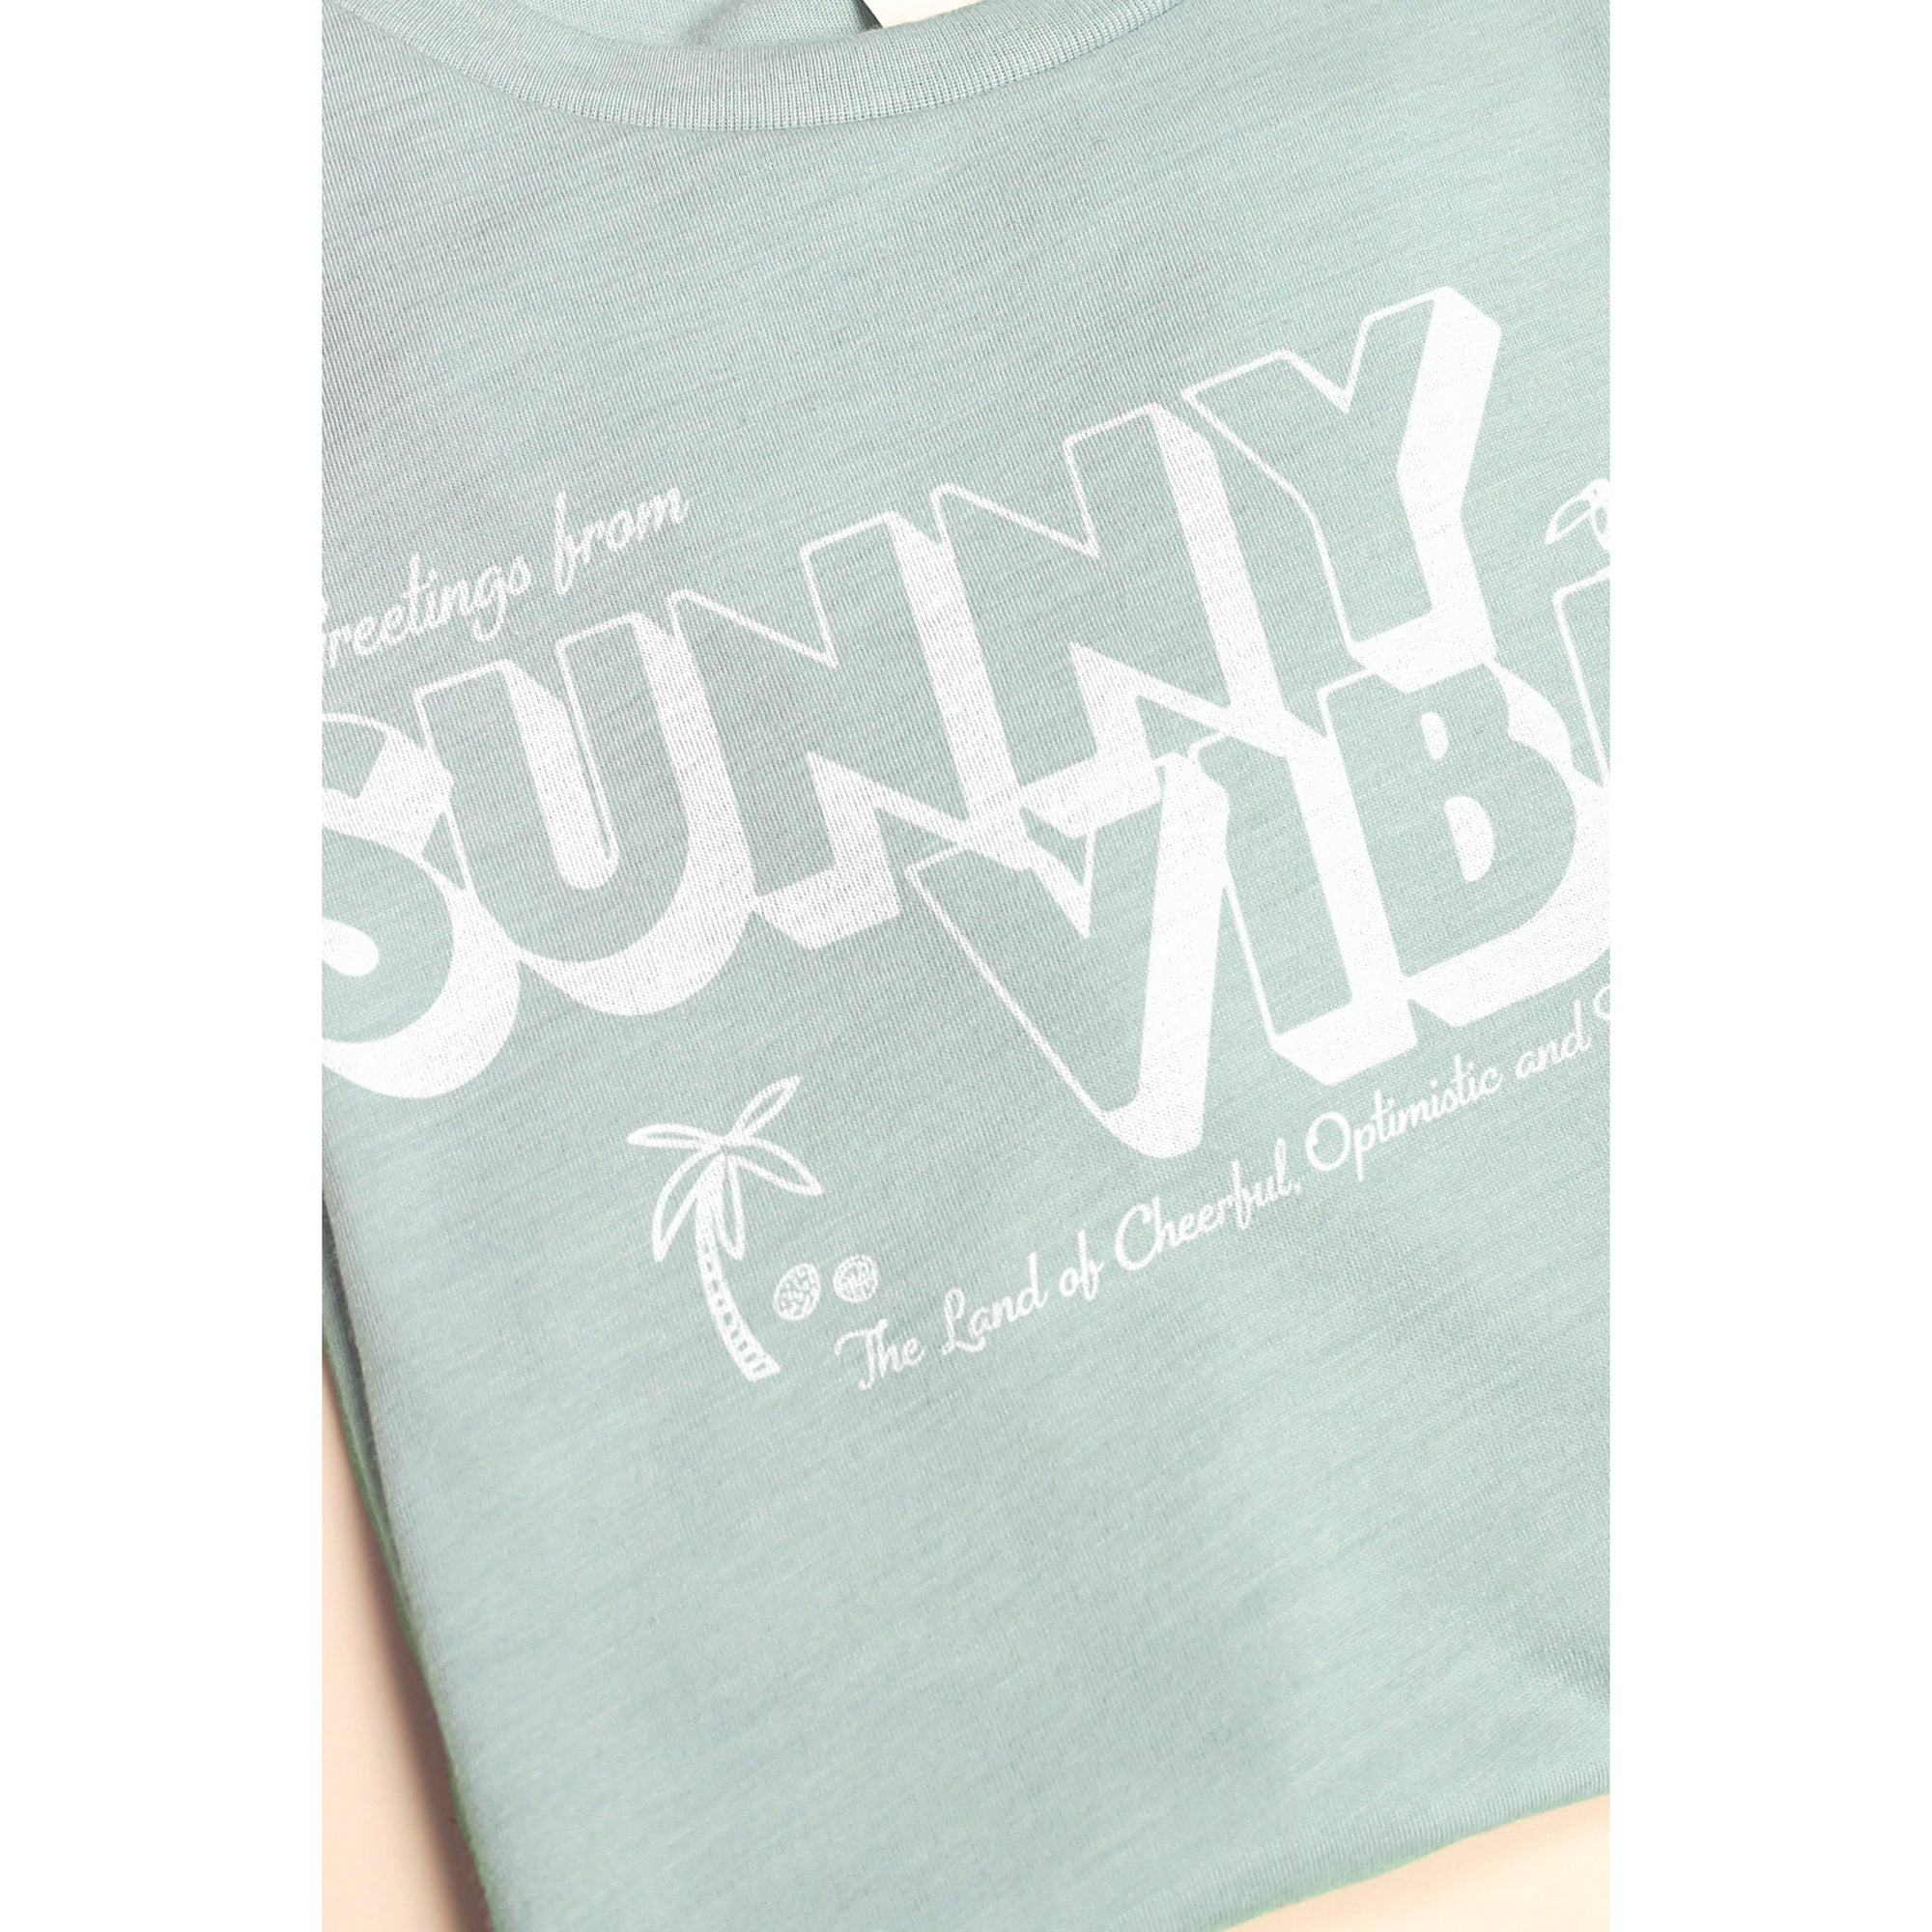 Sunny Vibes - thread tank | Stories you can wear.